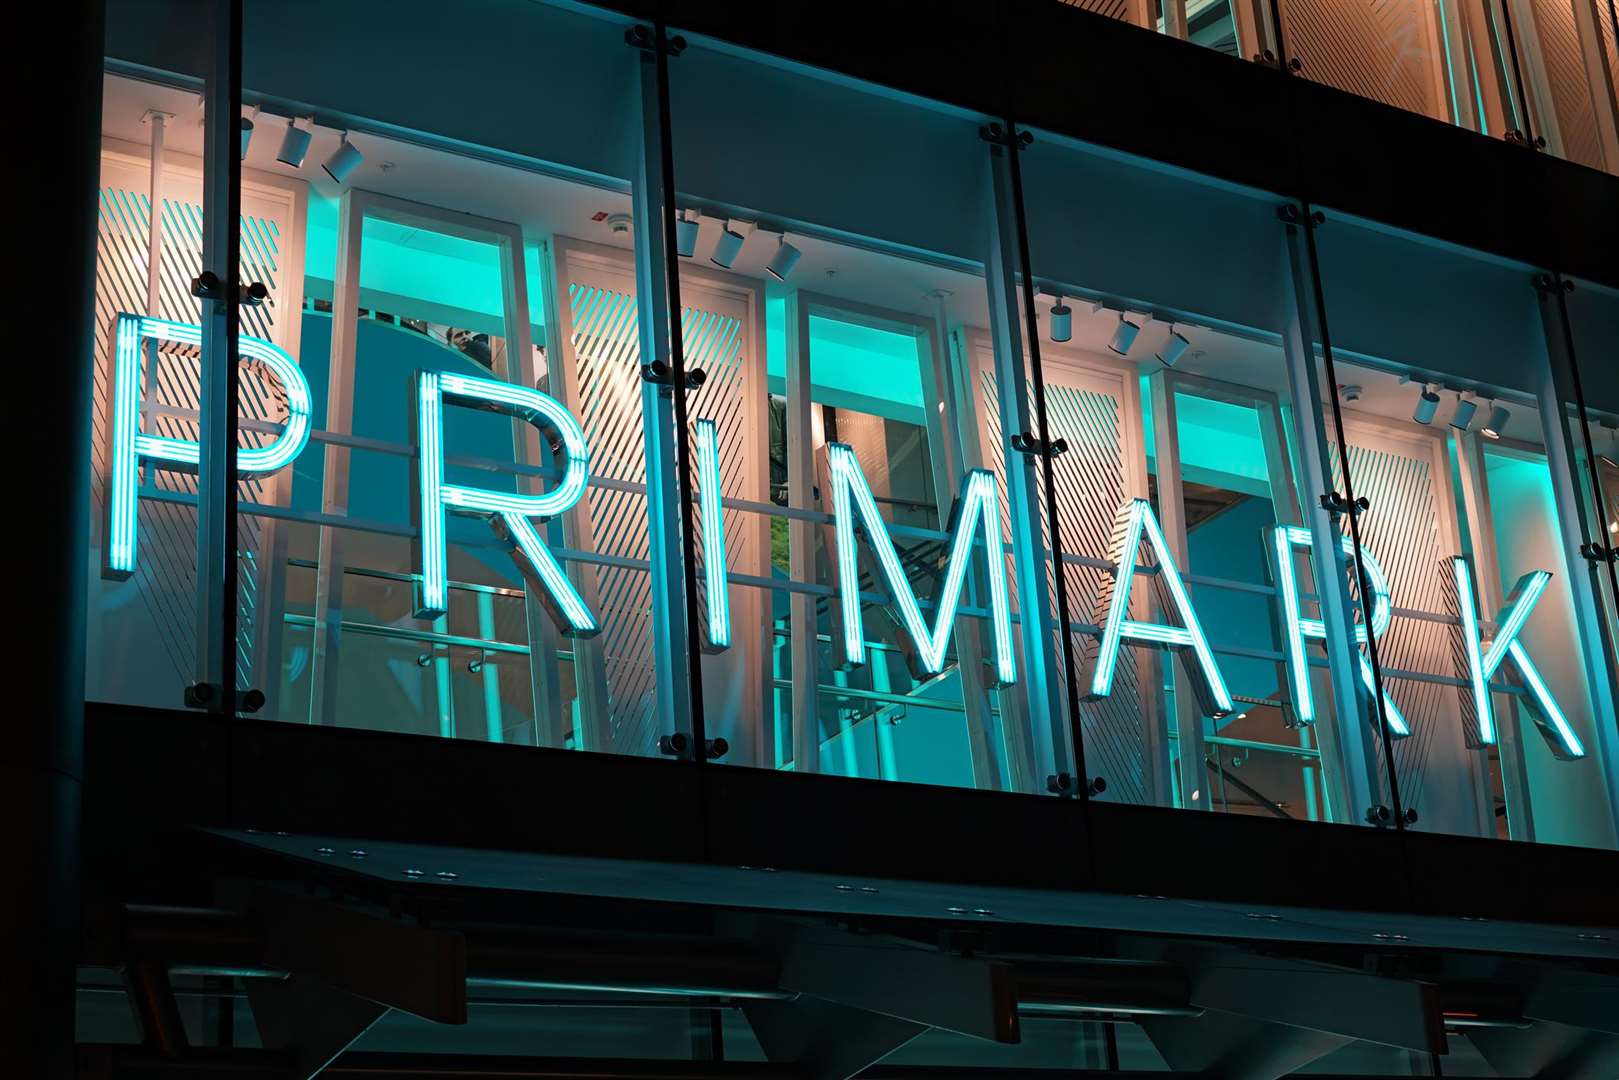 Primark will be opening at Bluewater shopping centre, in Greenhithe, next month